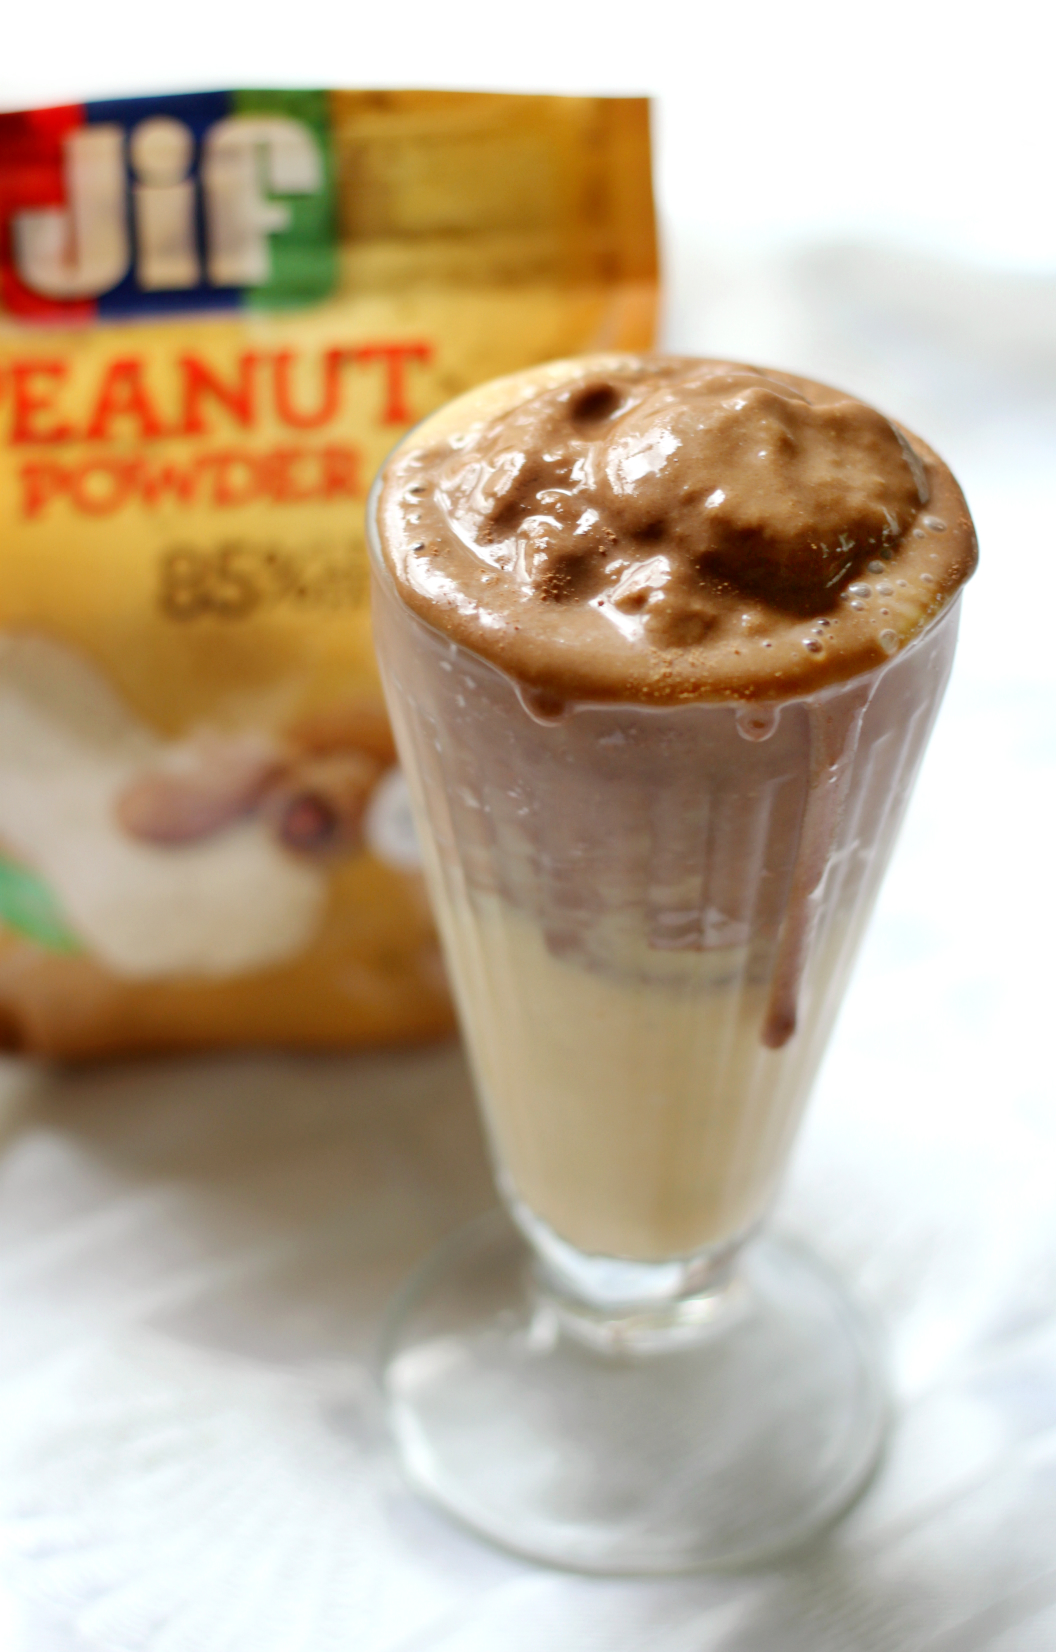 Peanut Butter Cup Protein Smoothie | Strength and Sunshine @RebeccaGF666 An easy protein smoothie recipe that tastes just like a peanut butter cup! A gluten-free and vegan protein smoothie perfect for breakfast or a post-workout snack that will fuel you up with nutrition! #StartWithJifPowder [ad]